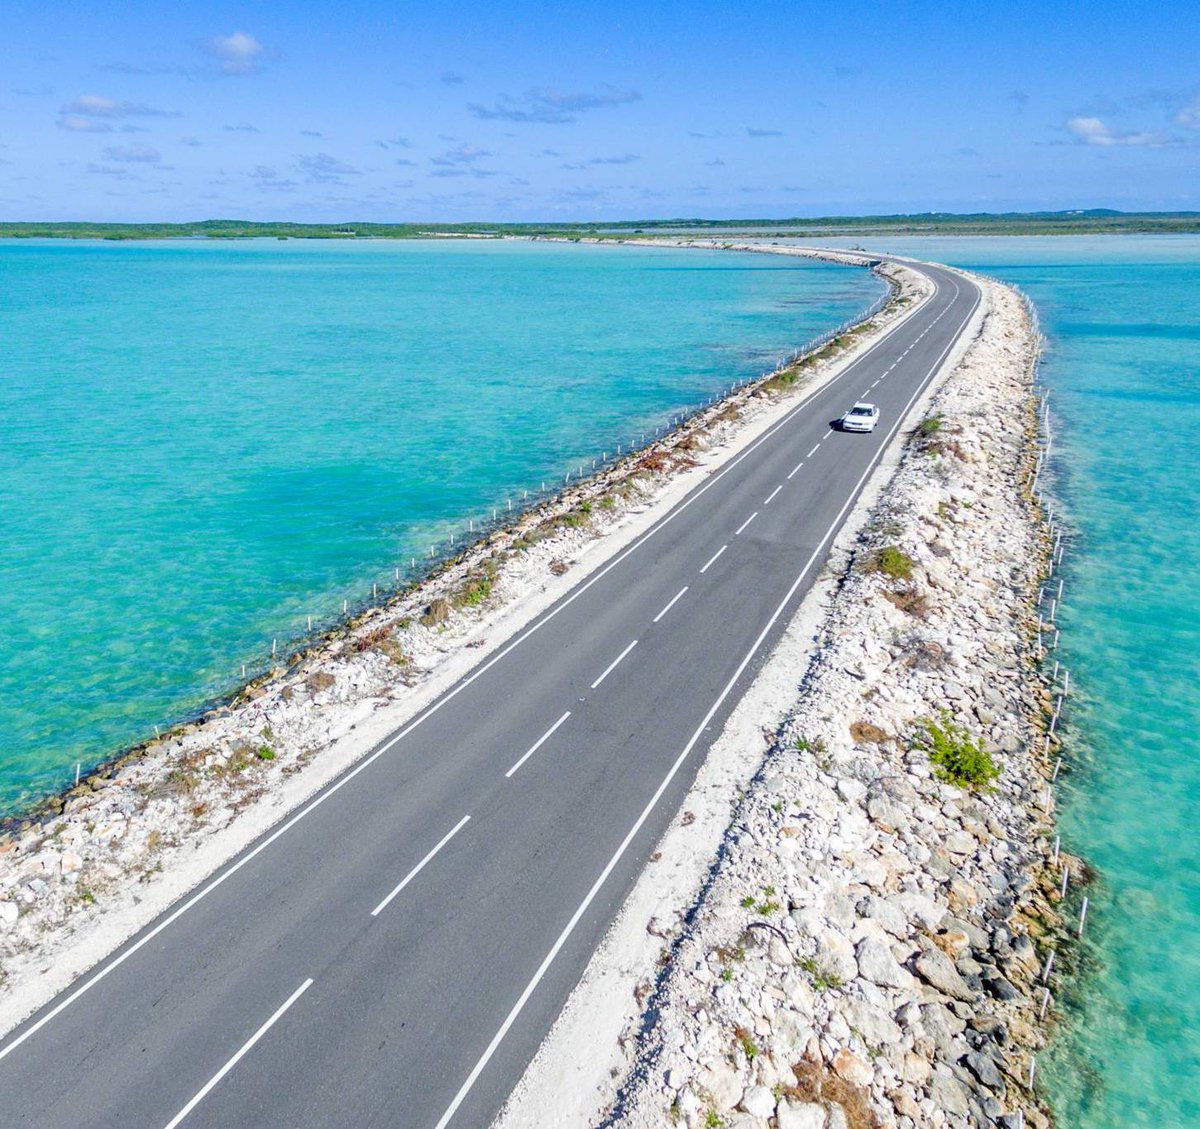 Island-bound and ready for new adventures ☀️🏝 We love hearing about your plans on island—what's your weekend recipe for relaxation? 📍 North and Middle Caicos Causeway